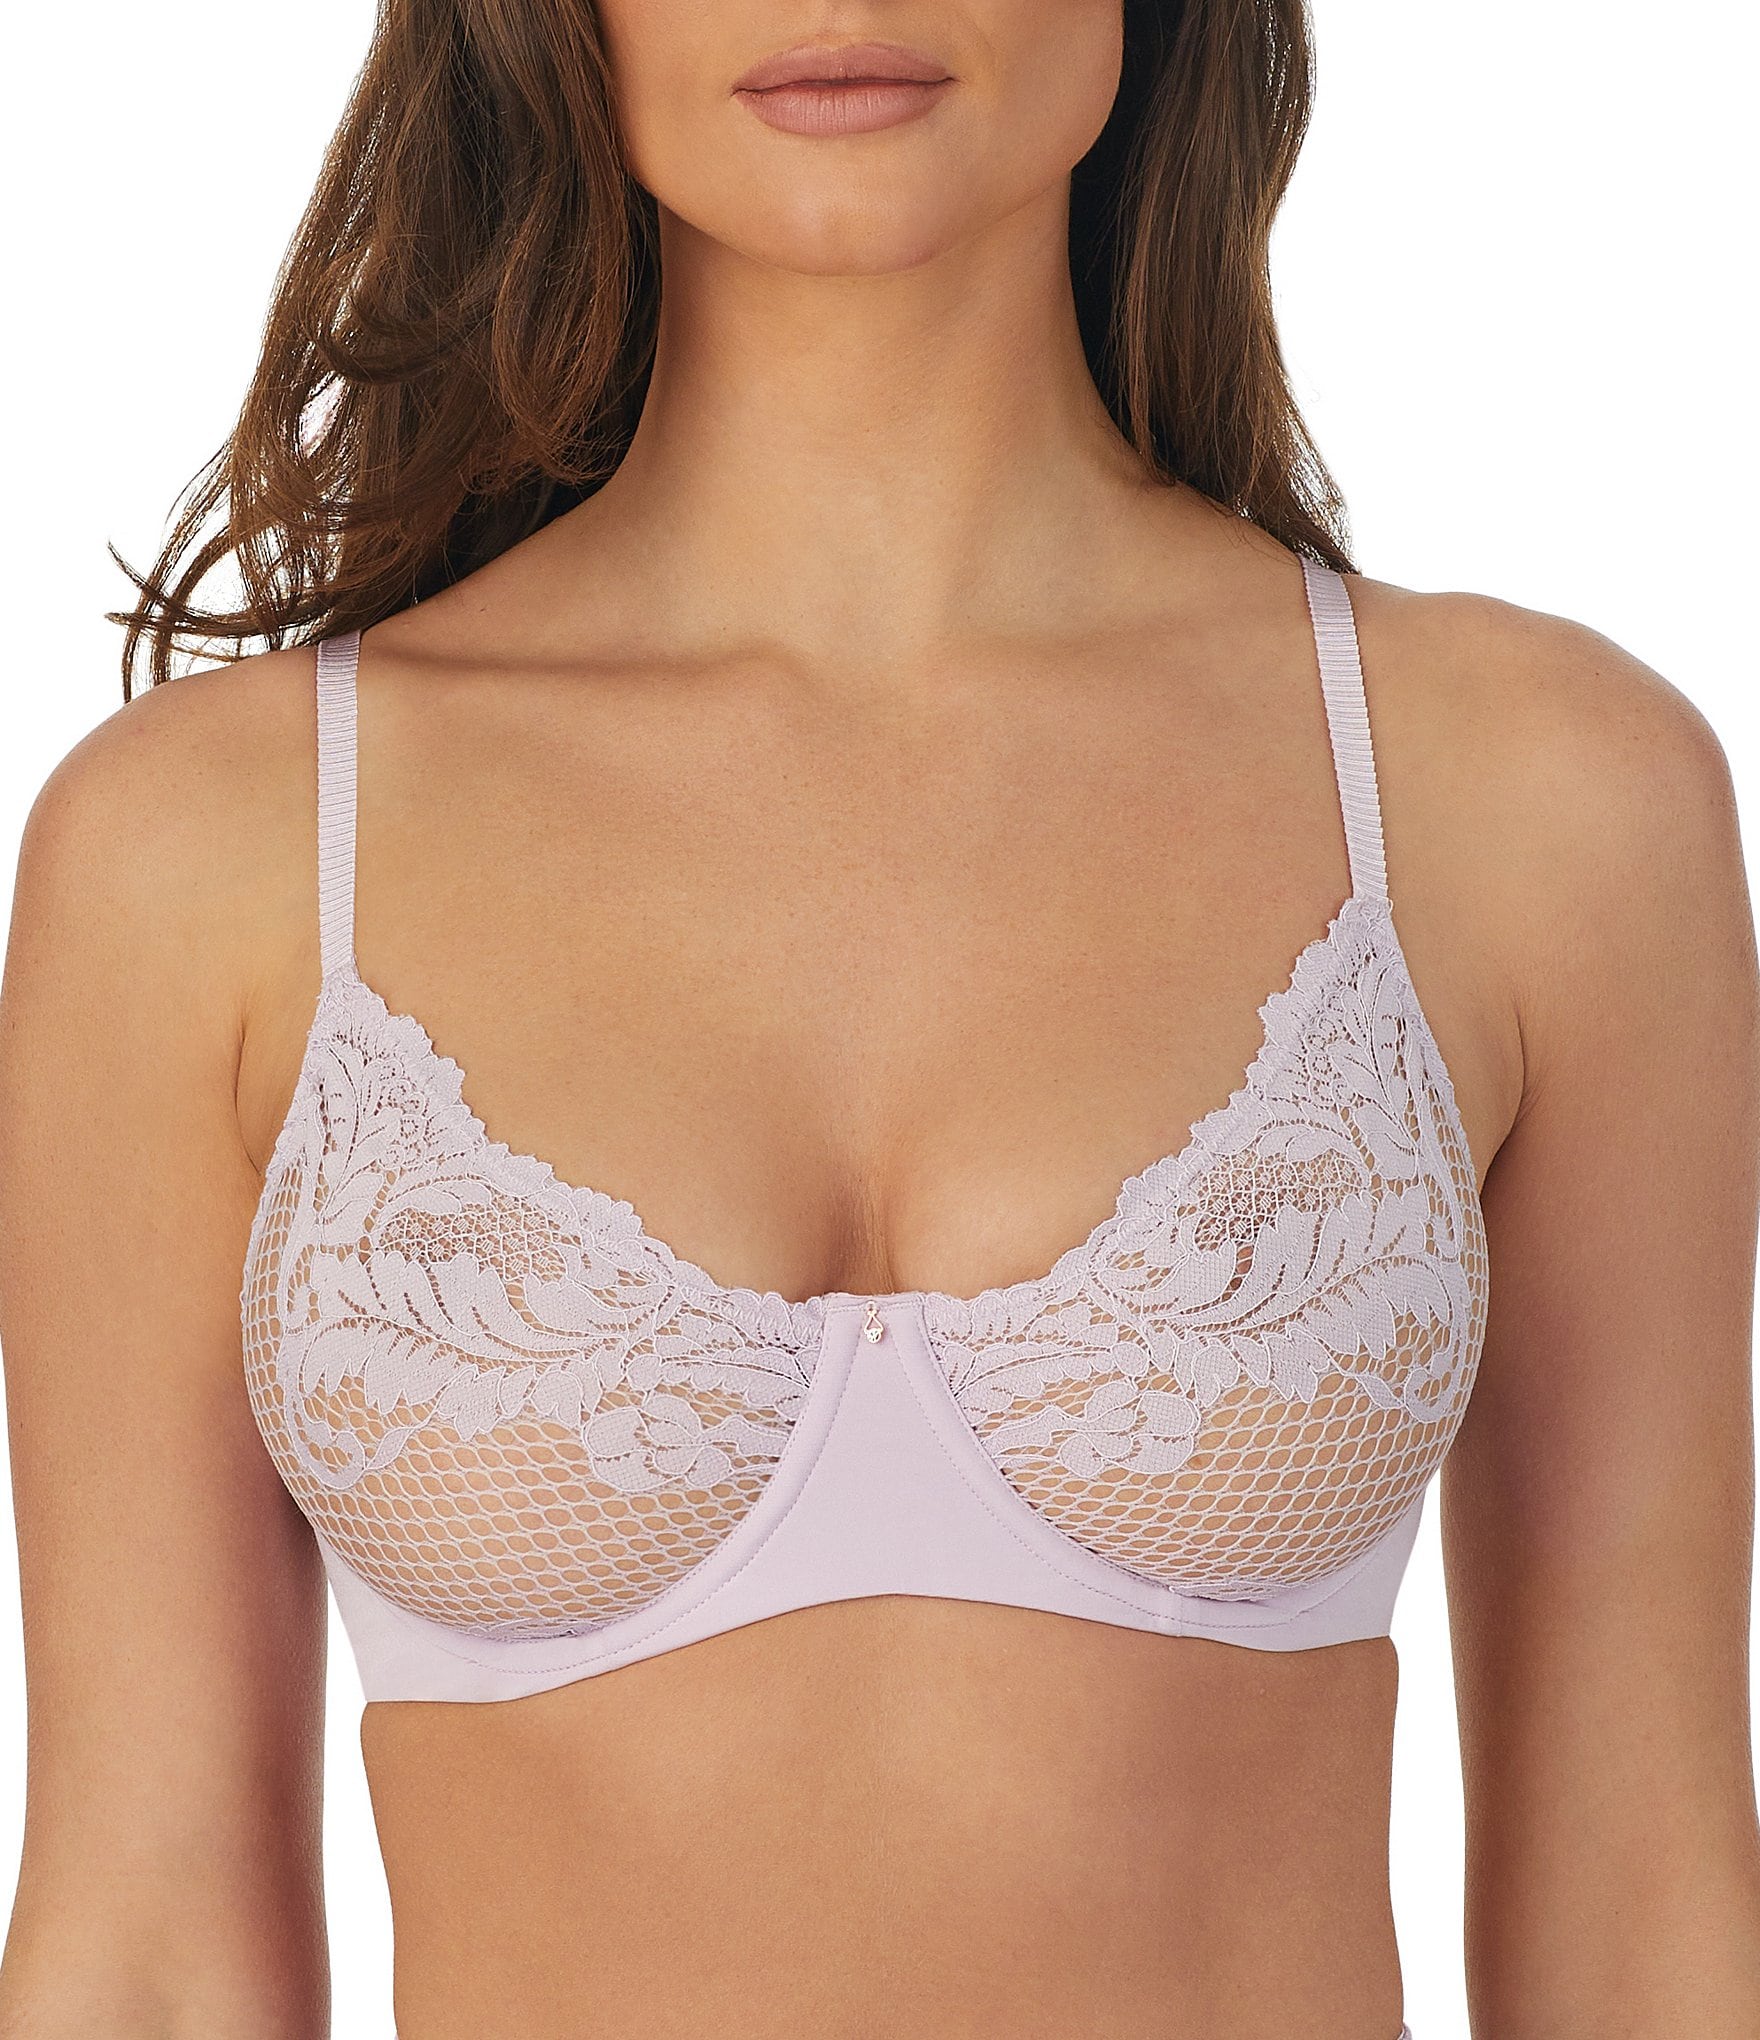 Unlined Bras 36C, Bras for Large Breasts